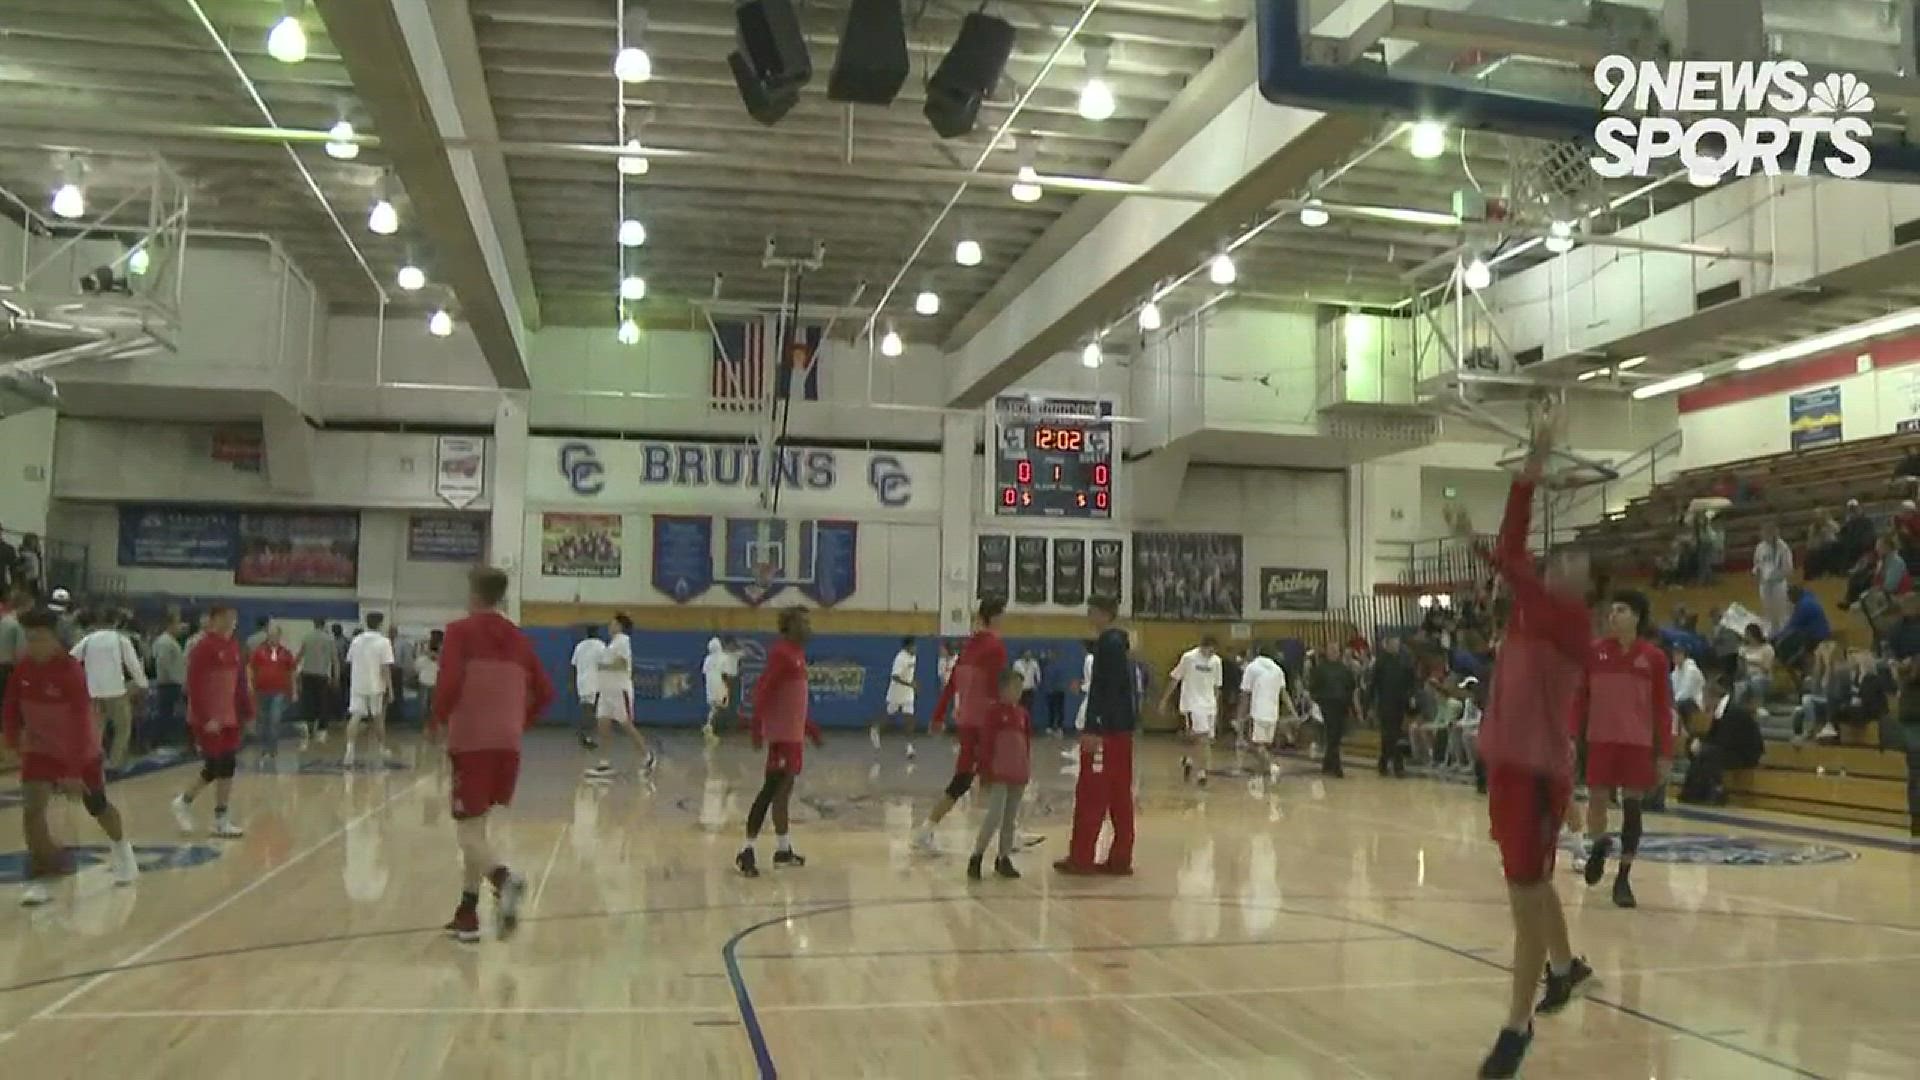 The Chaparral Wolverines and Cherry Creek Bruins basketball game ends in buzzer beater fashion.